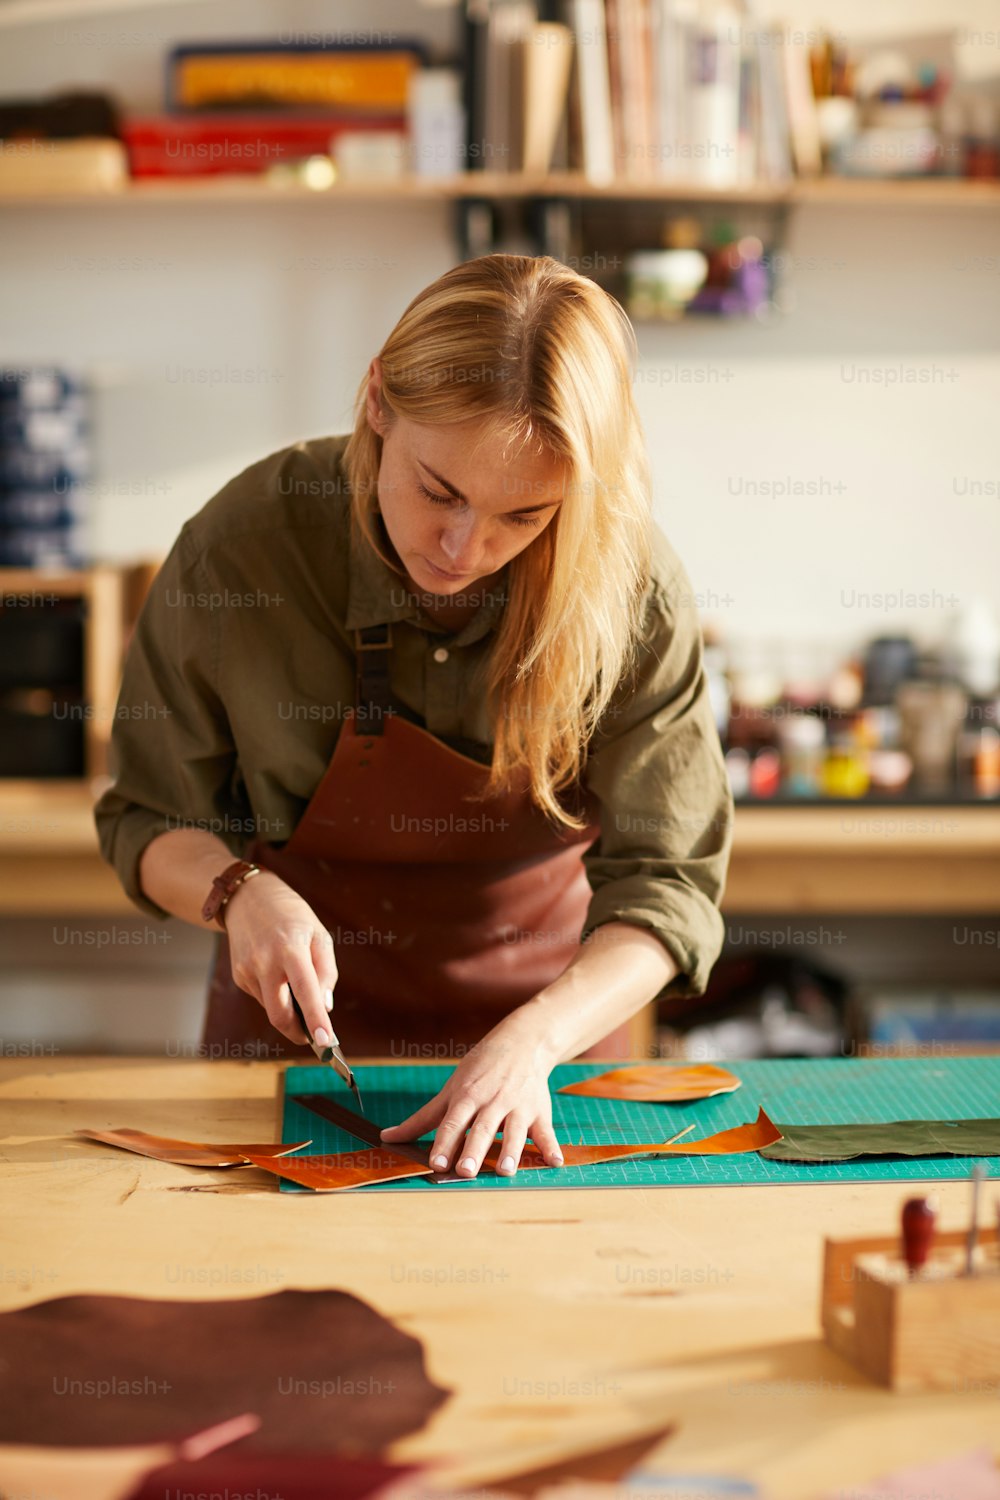 Portrait of young woman cutting leather patterns in atelier workshop, copy space